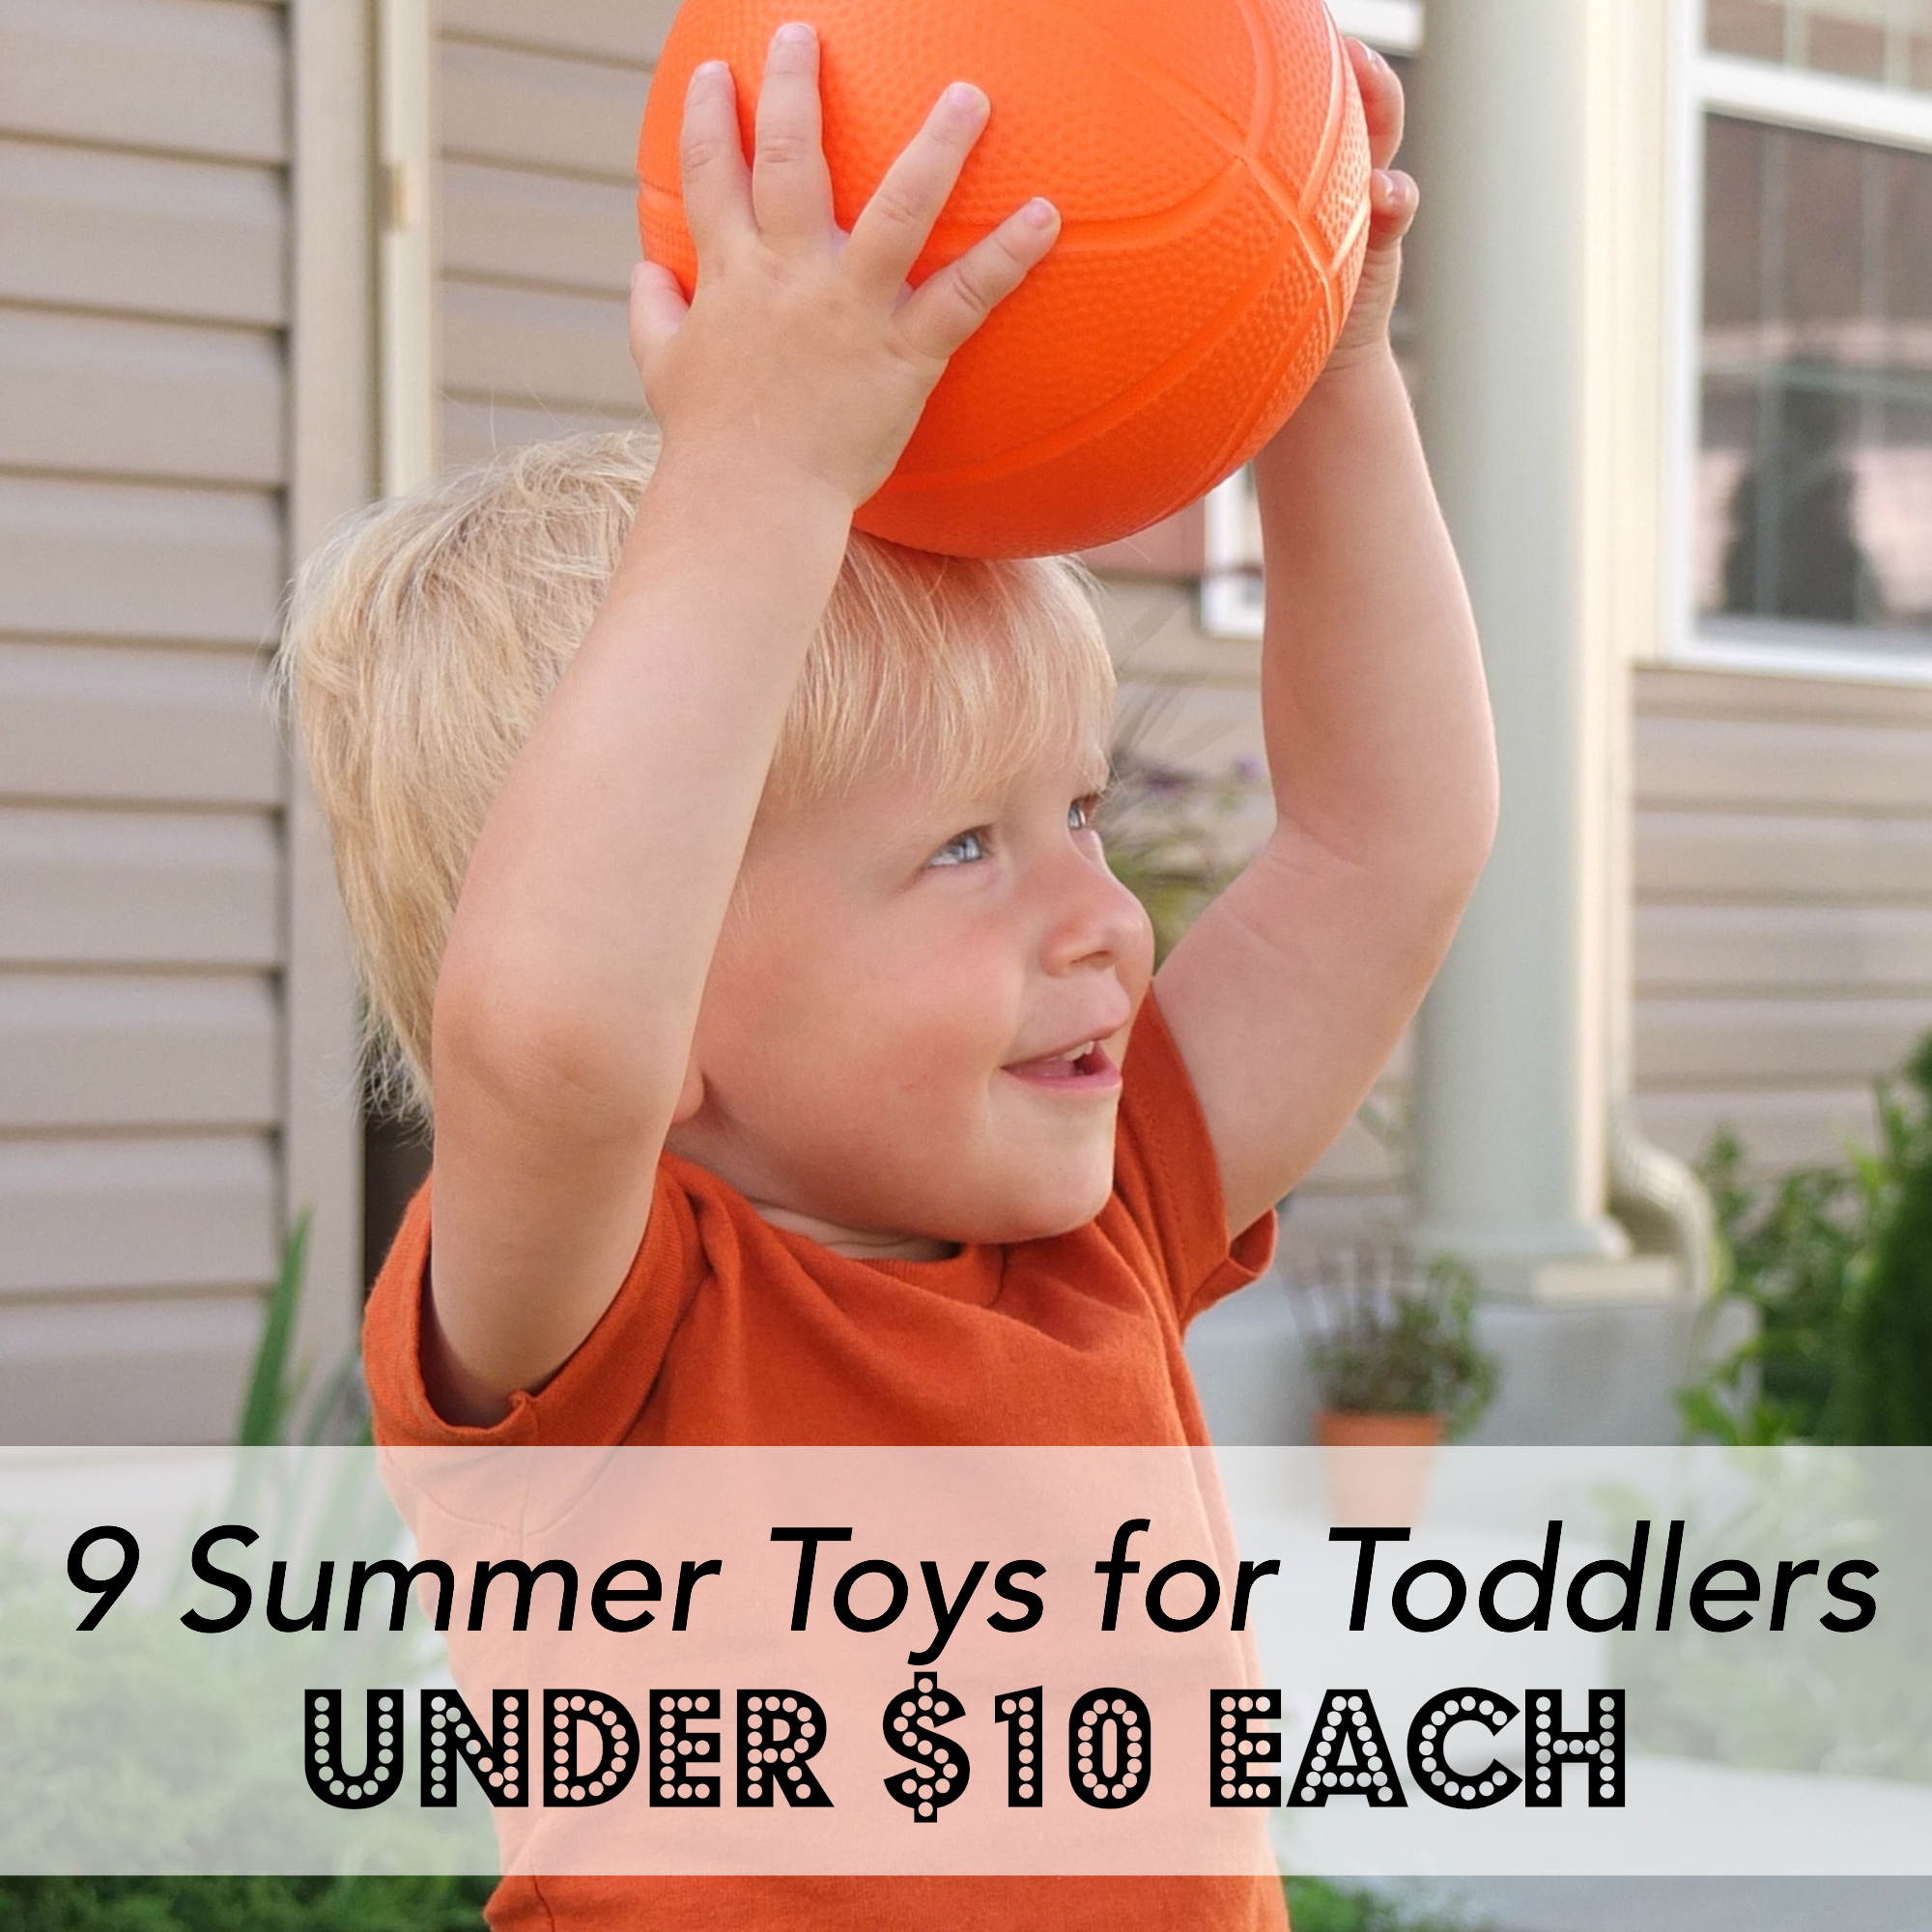 Inexpensive Summer Toys for Toddlers